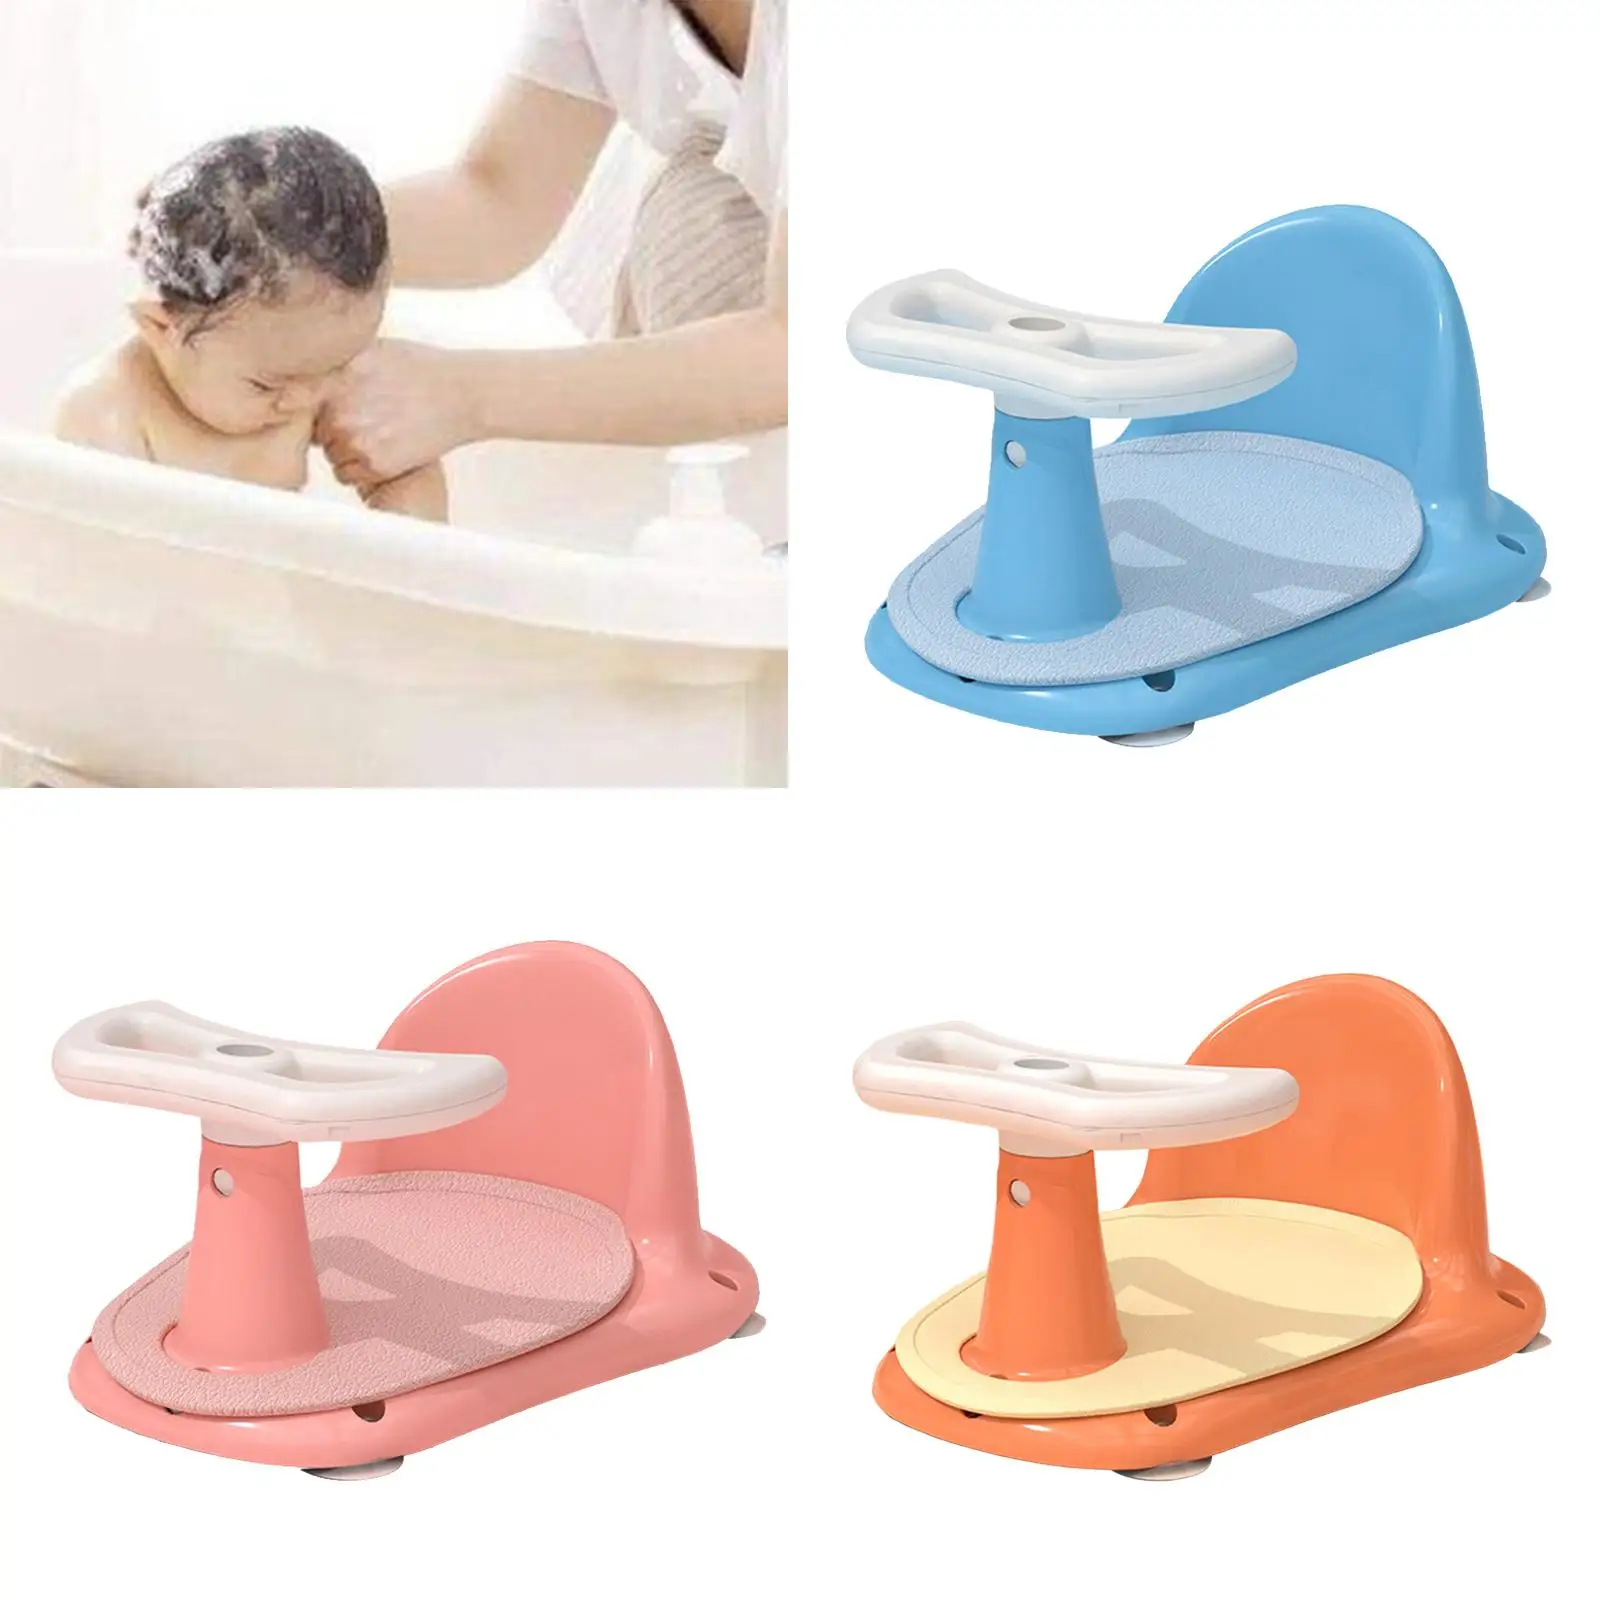 Cute Bathtub Seat Tub Sitting up Suction Steering Wheel Seat Support for 6-18 Months